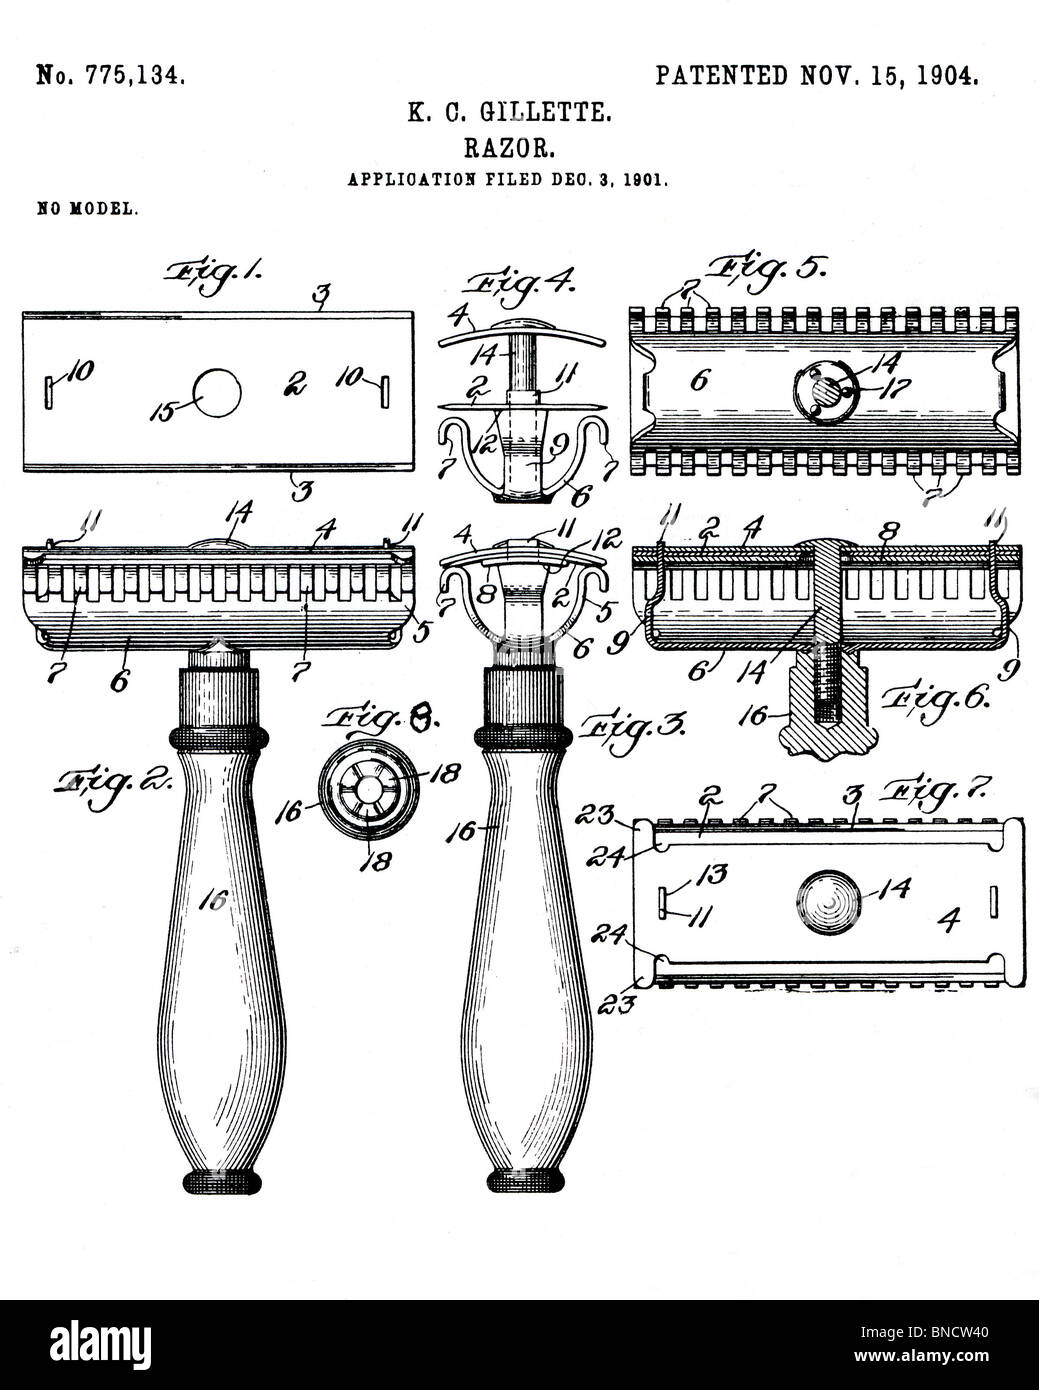 GILLETTE SAFETY RAZOR PATENT from 1904 Stock Photo